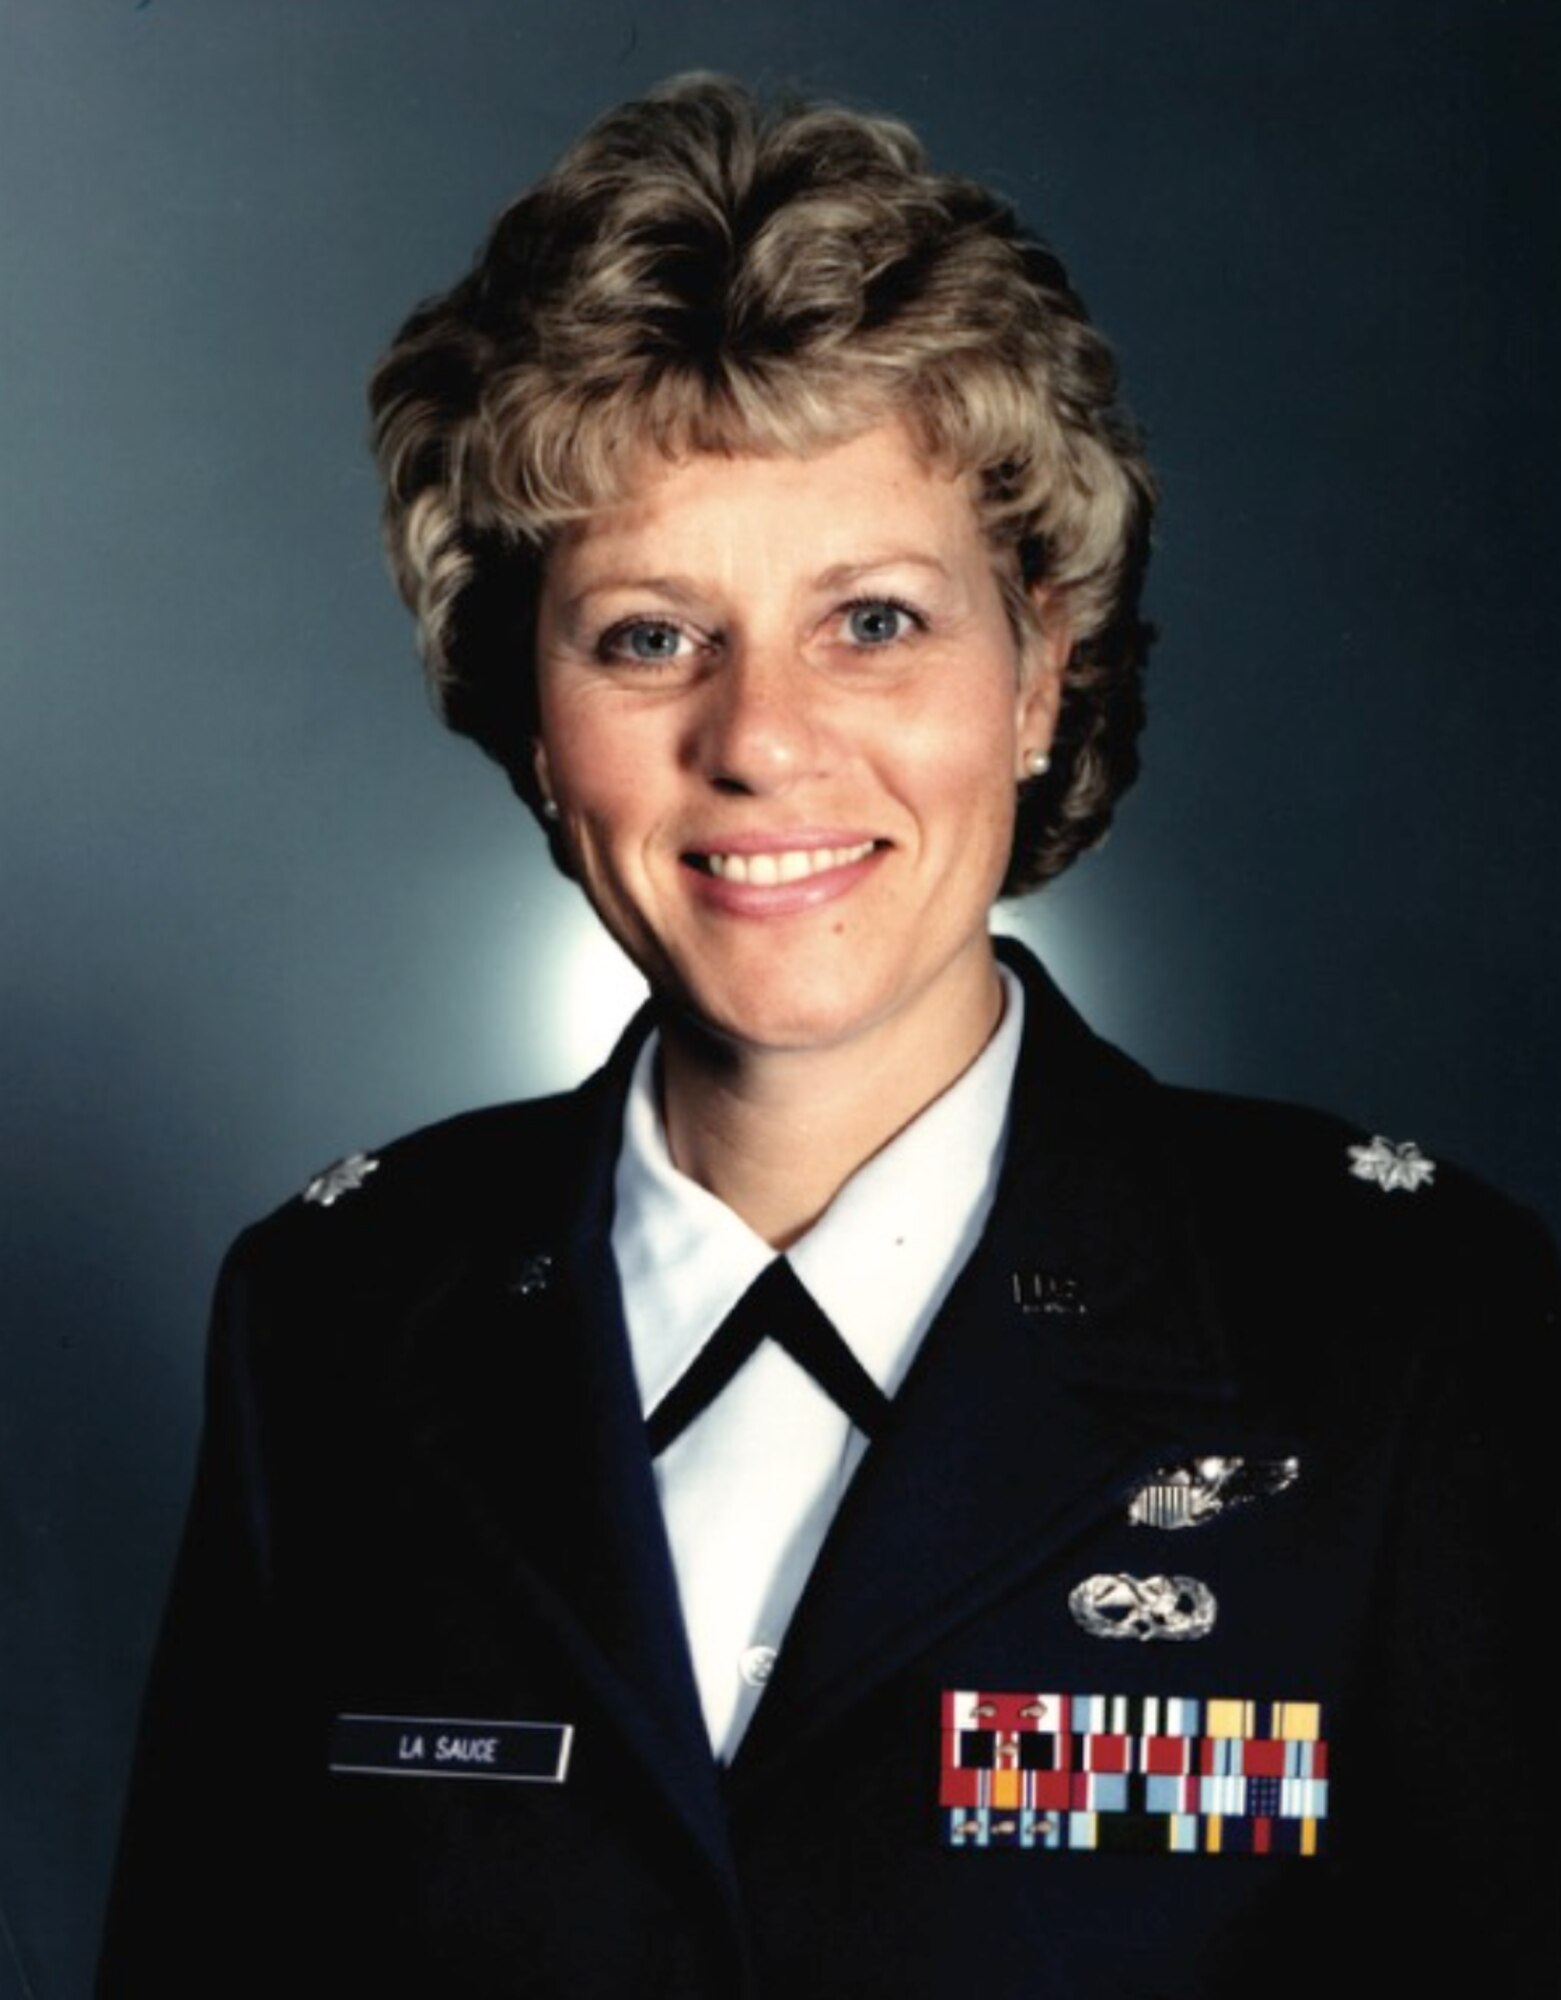 Kathy La Sauce didn’t blaze trails during her 20-year Air Force career. She scorched them.